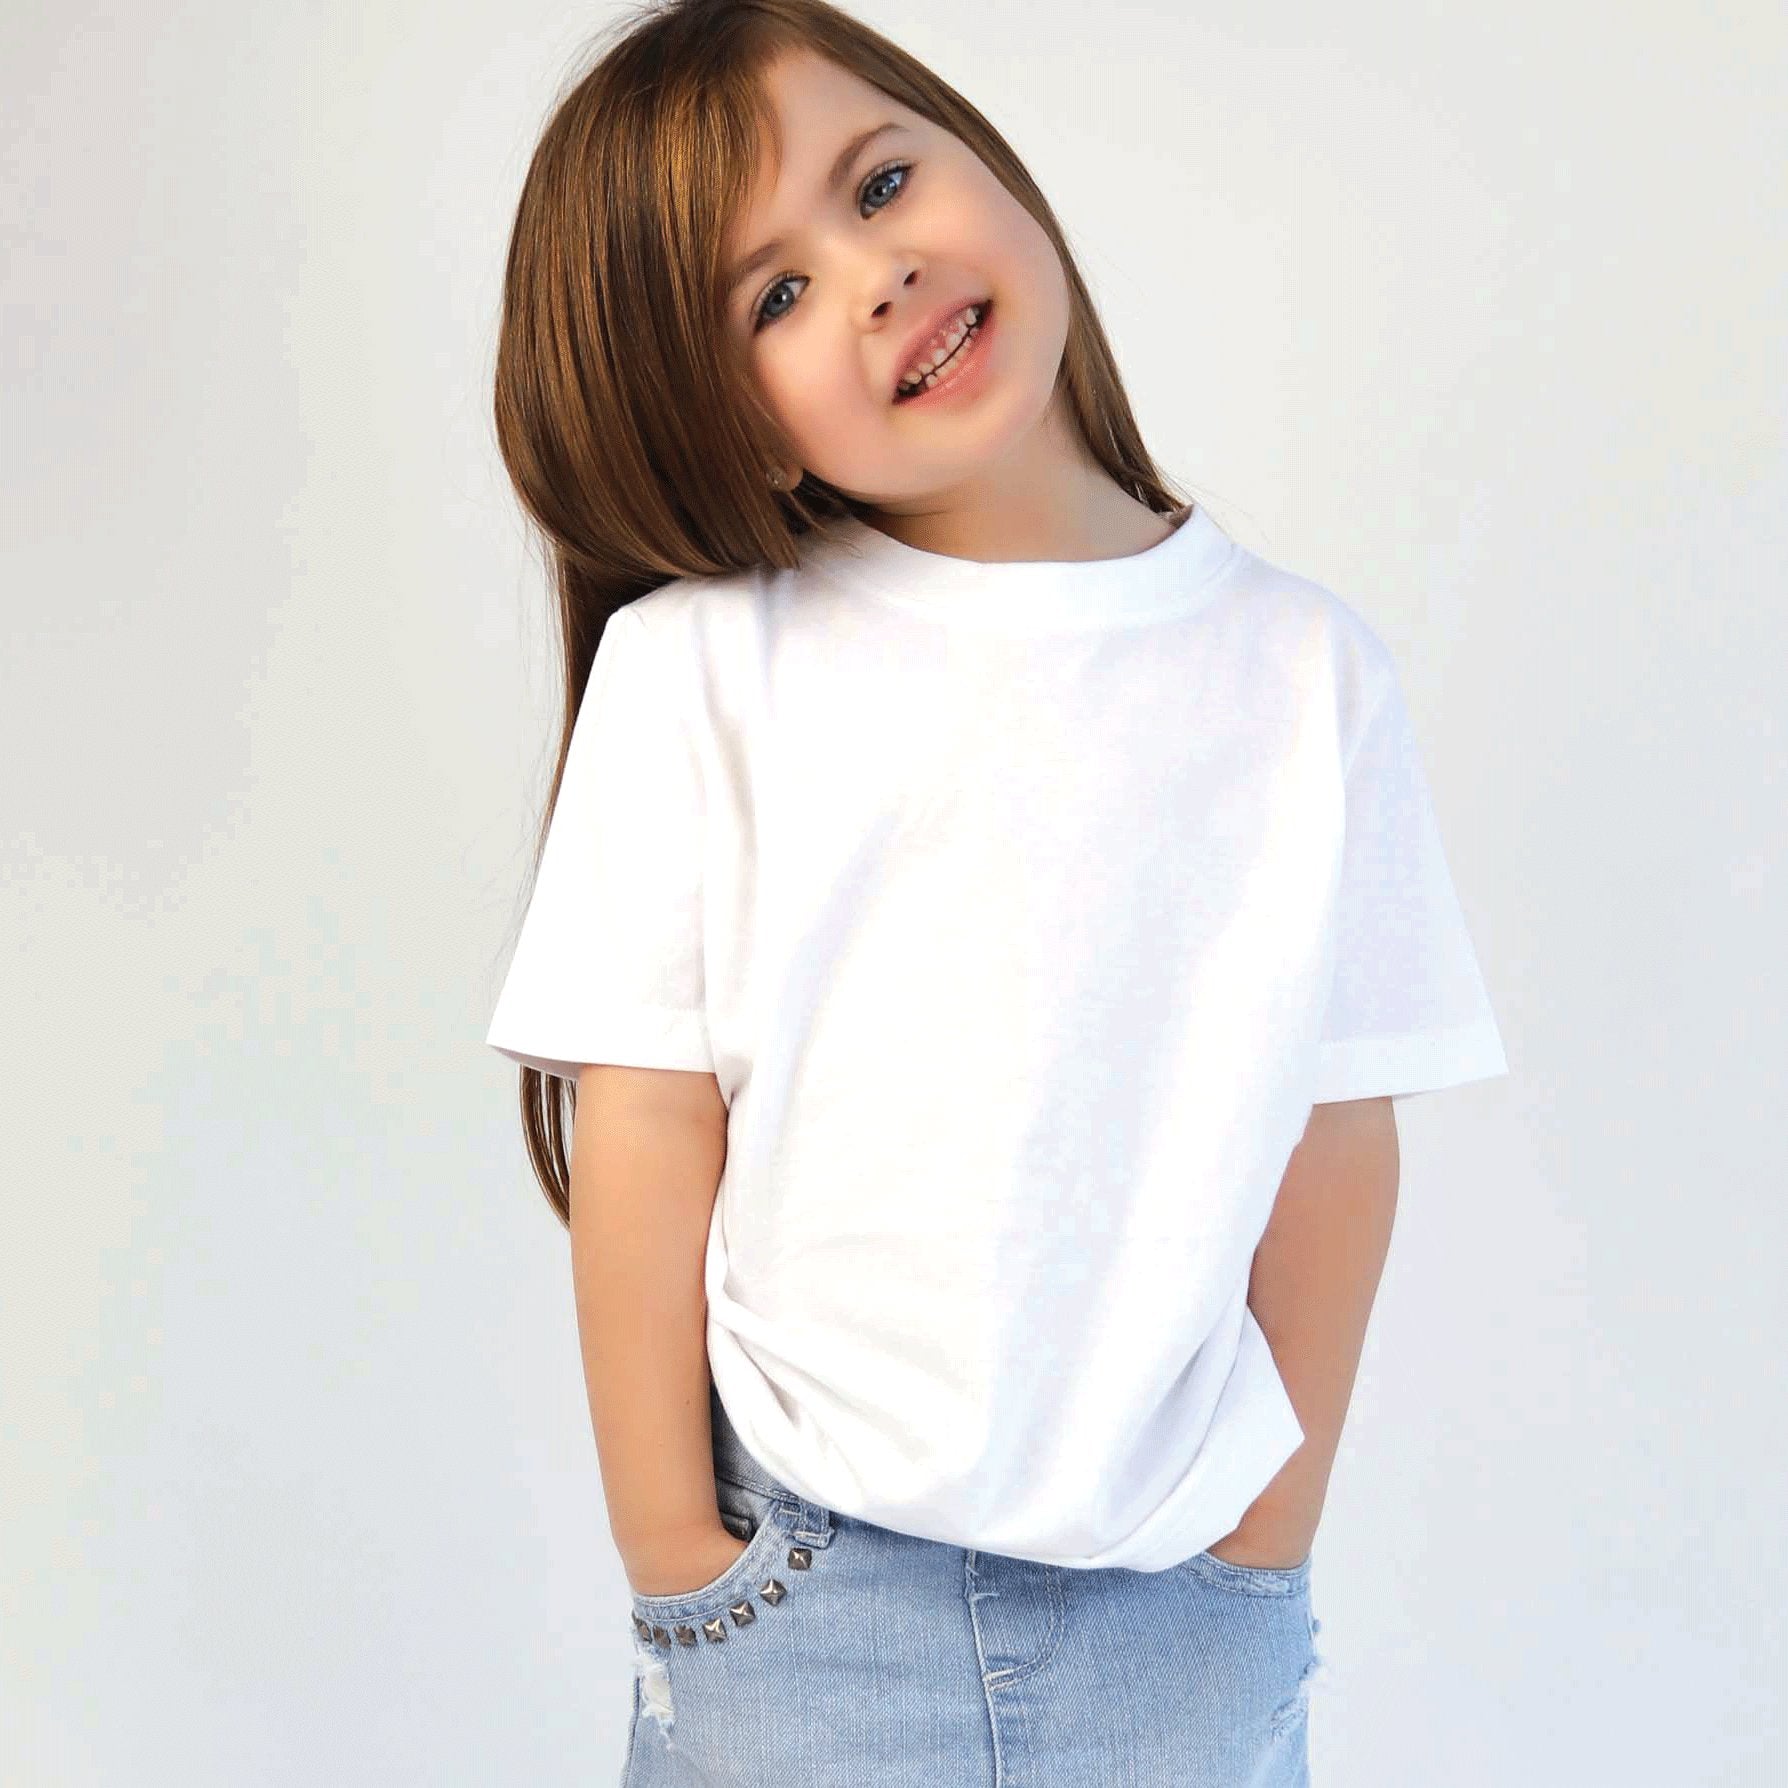 The Good Tee - Basic T-Shirts for Children